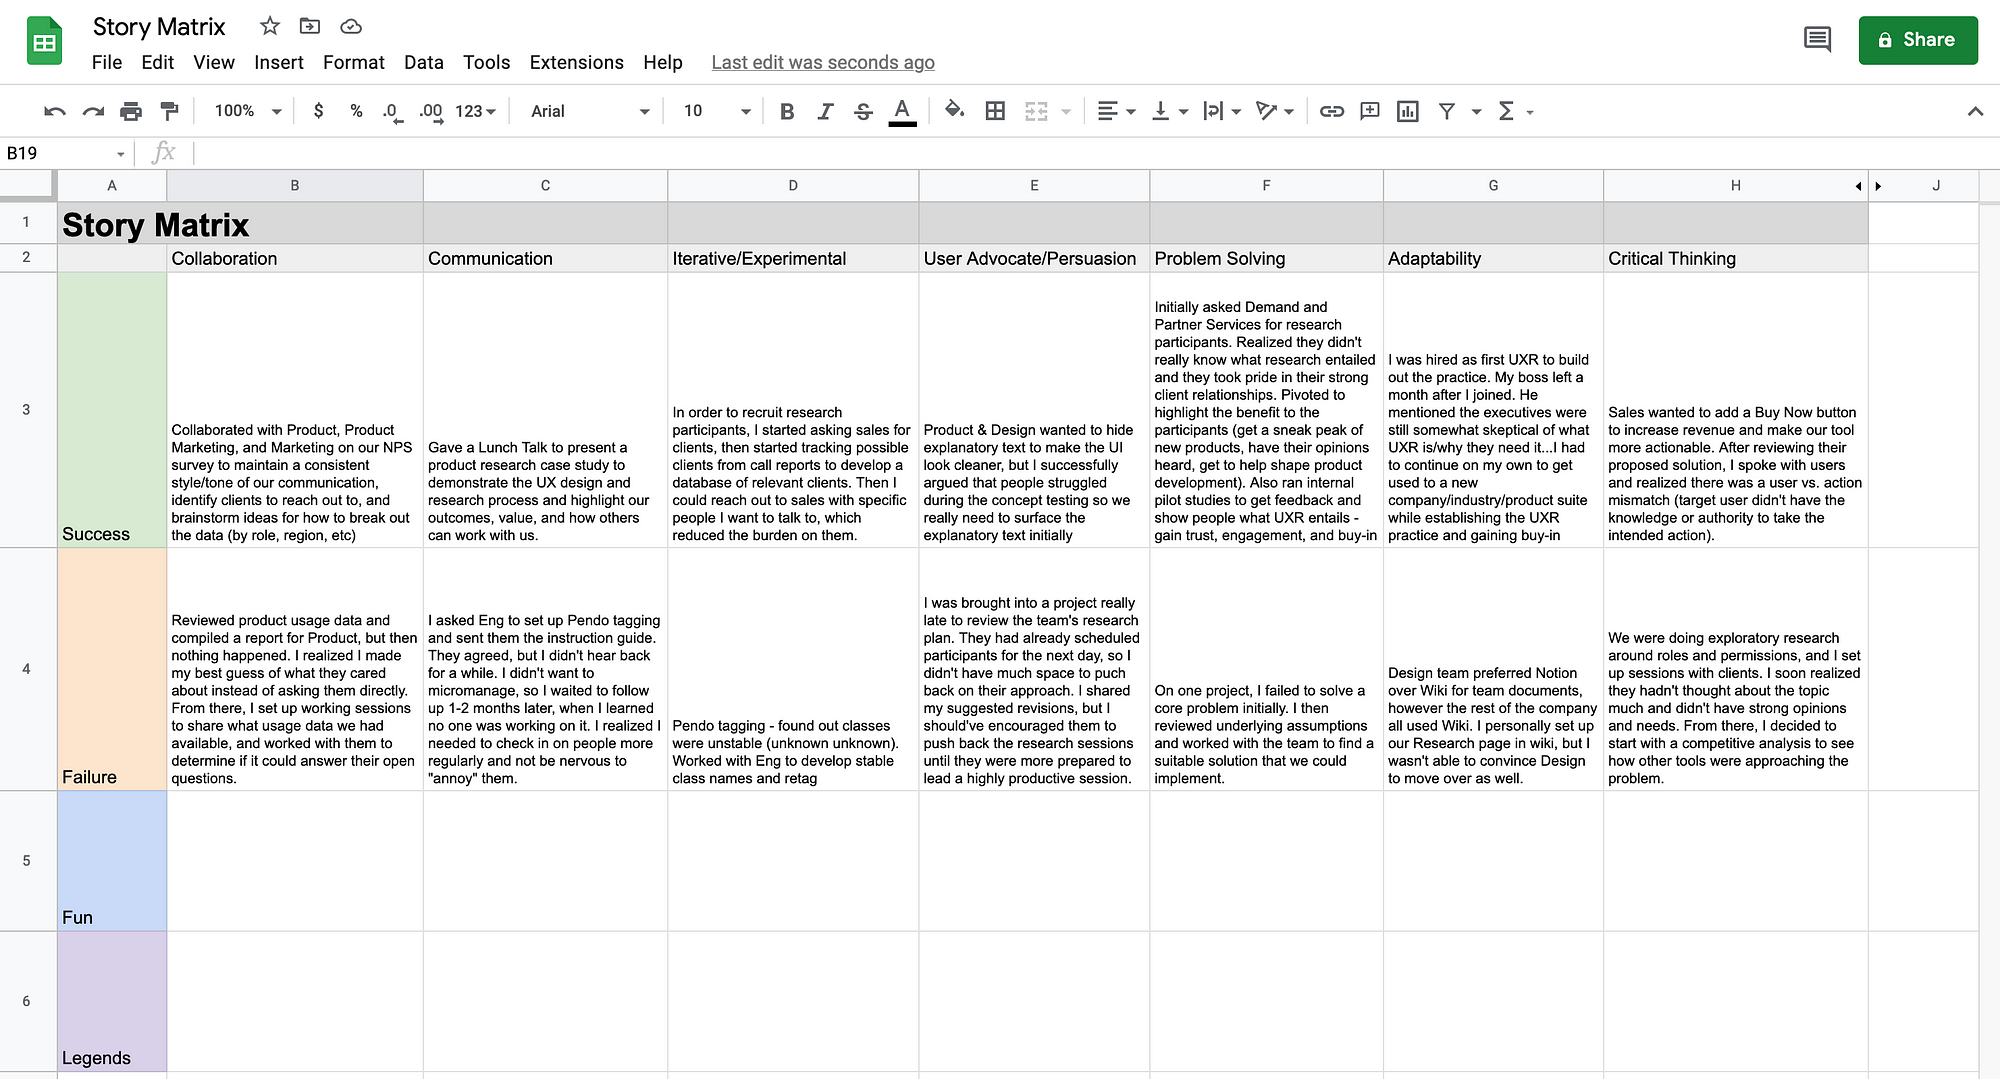 This is a sample Google Sheets where you can record success, failure, fun, and legendary stories around characteristics such as collaboration, communication, iteration, user advocacy, problem solving, adaptivity, and critical thinking.